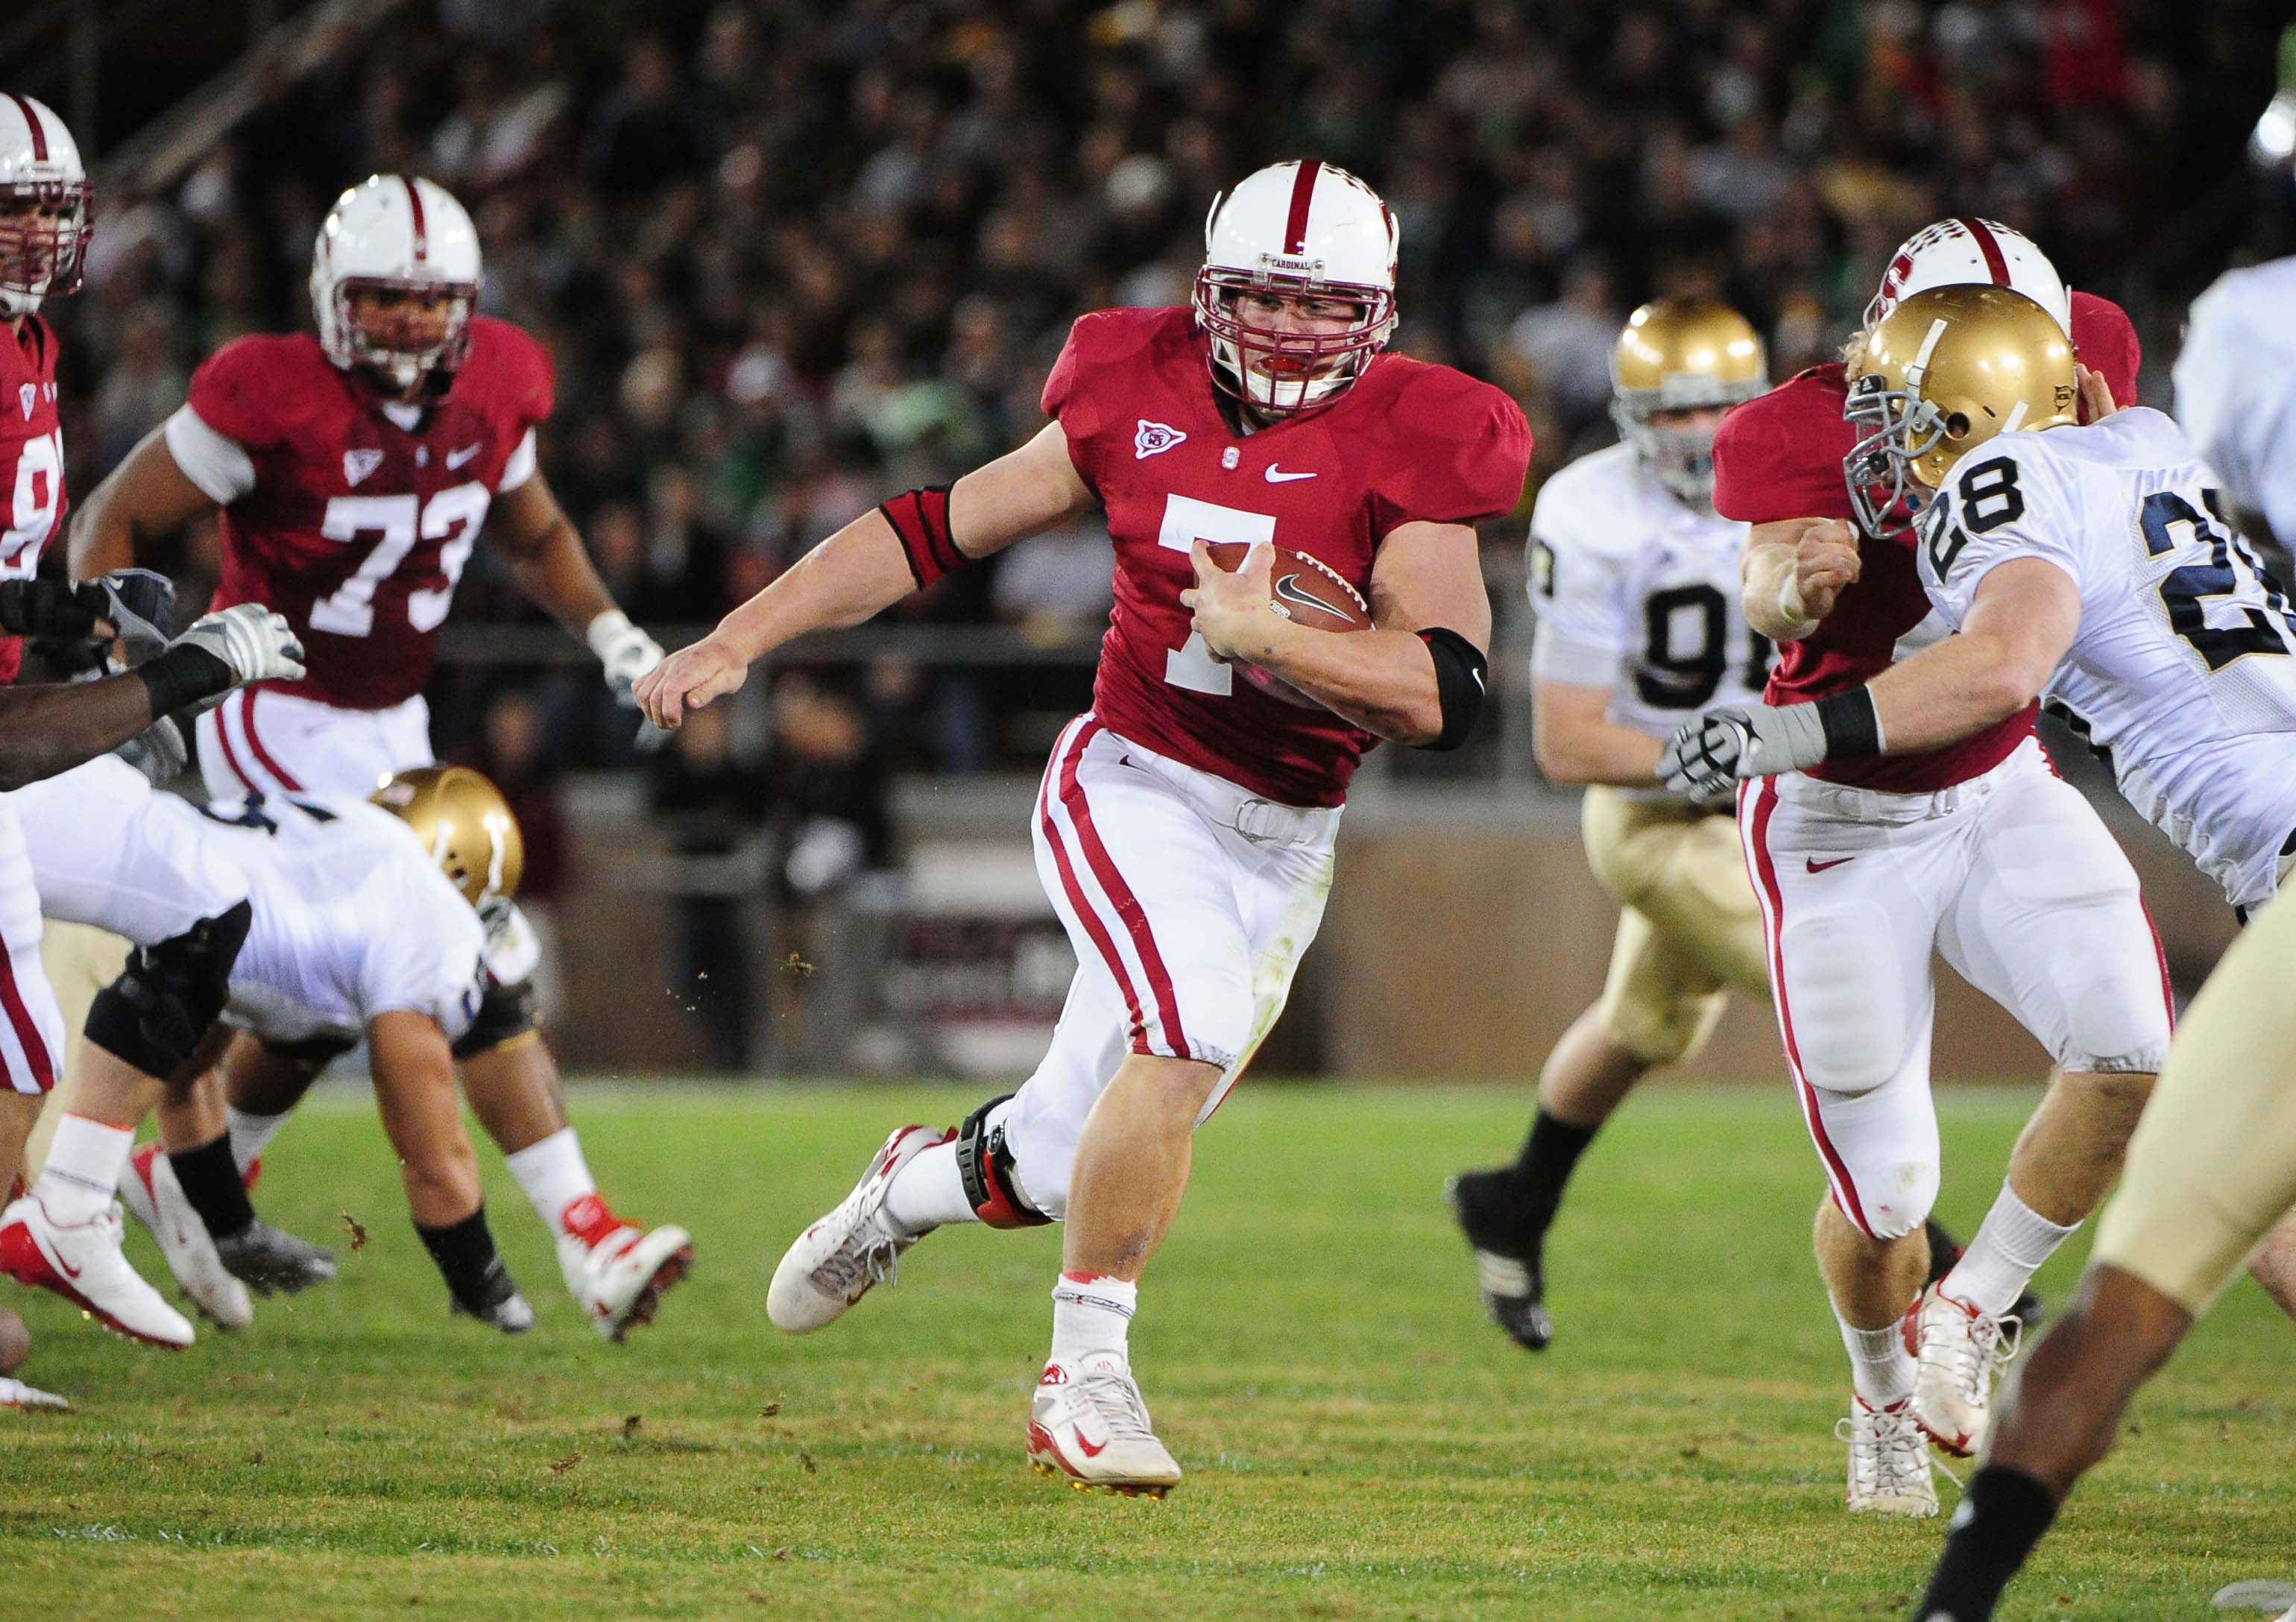 November 28, 2009; Stanford, CA, USA; Stanford Cardinal running back Toby Gerhart (7) carries the ball during the first quarter against the Notre Dame Fighting Irish at Stanford Stadium. The Fighting Irish defeated the Cardinal 45-38. Mandatory Credit: Kyle Terada-USA TODAY Sports